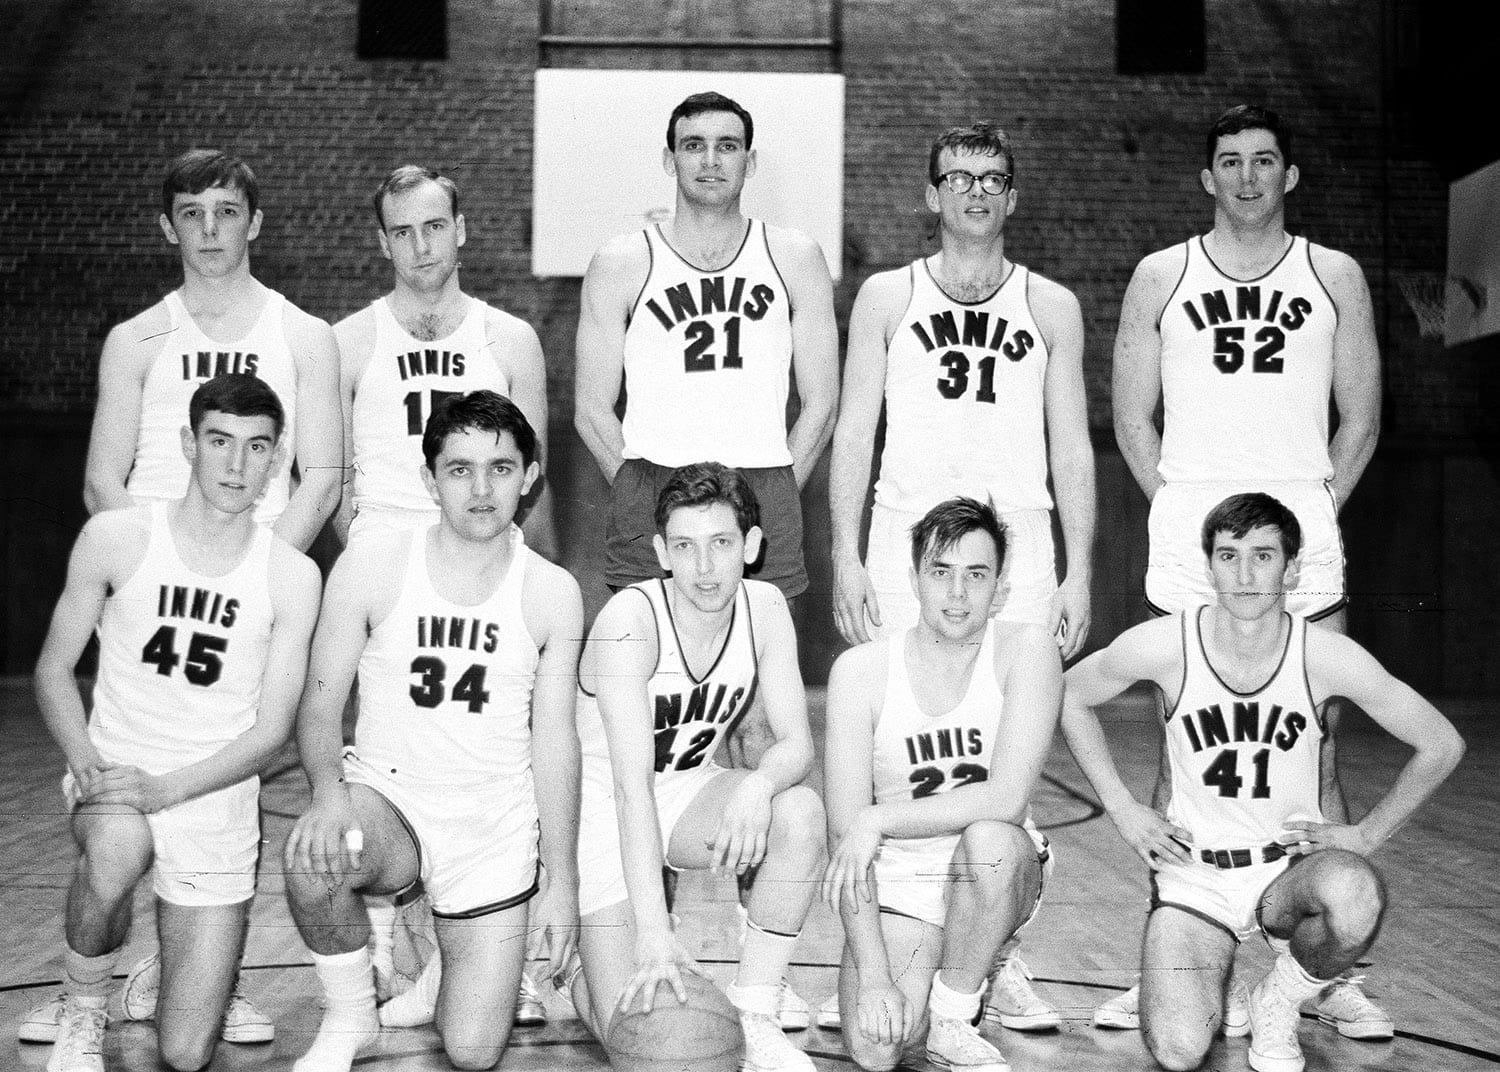 Black and white photo of the Men's Intramural Basketball Team posing wearing their uniforms.